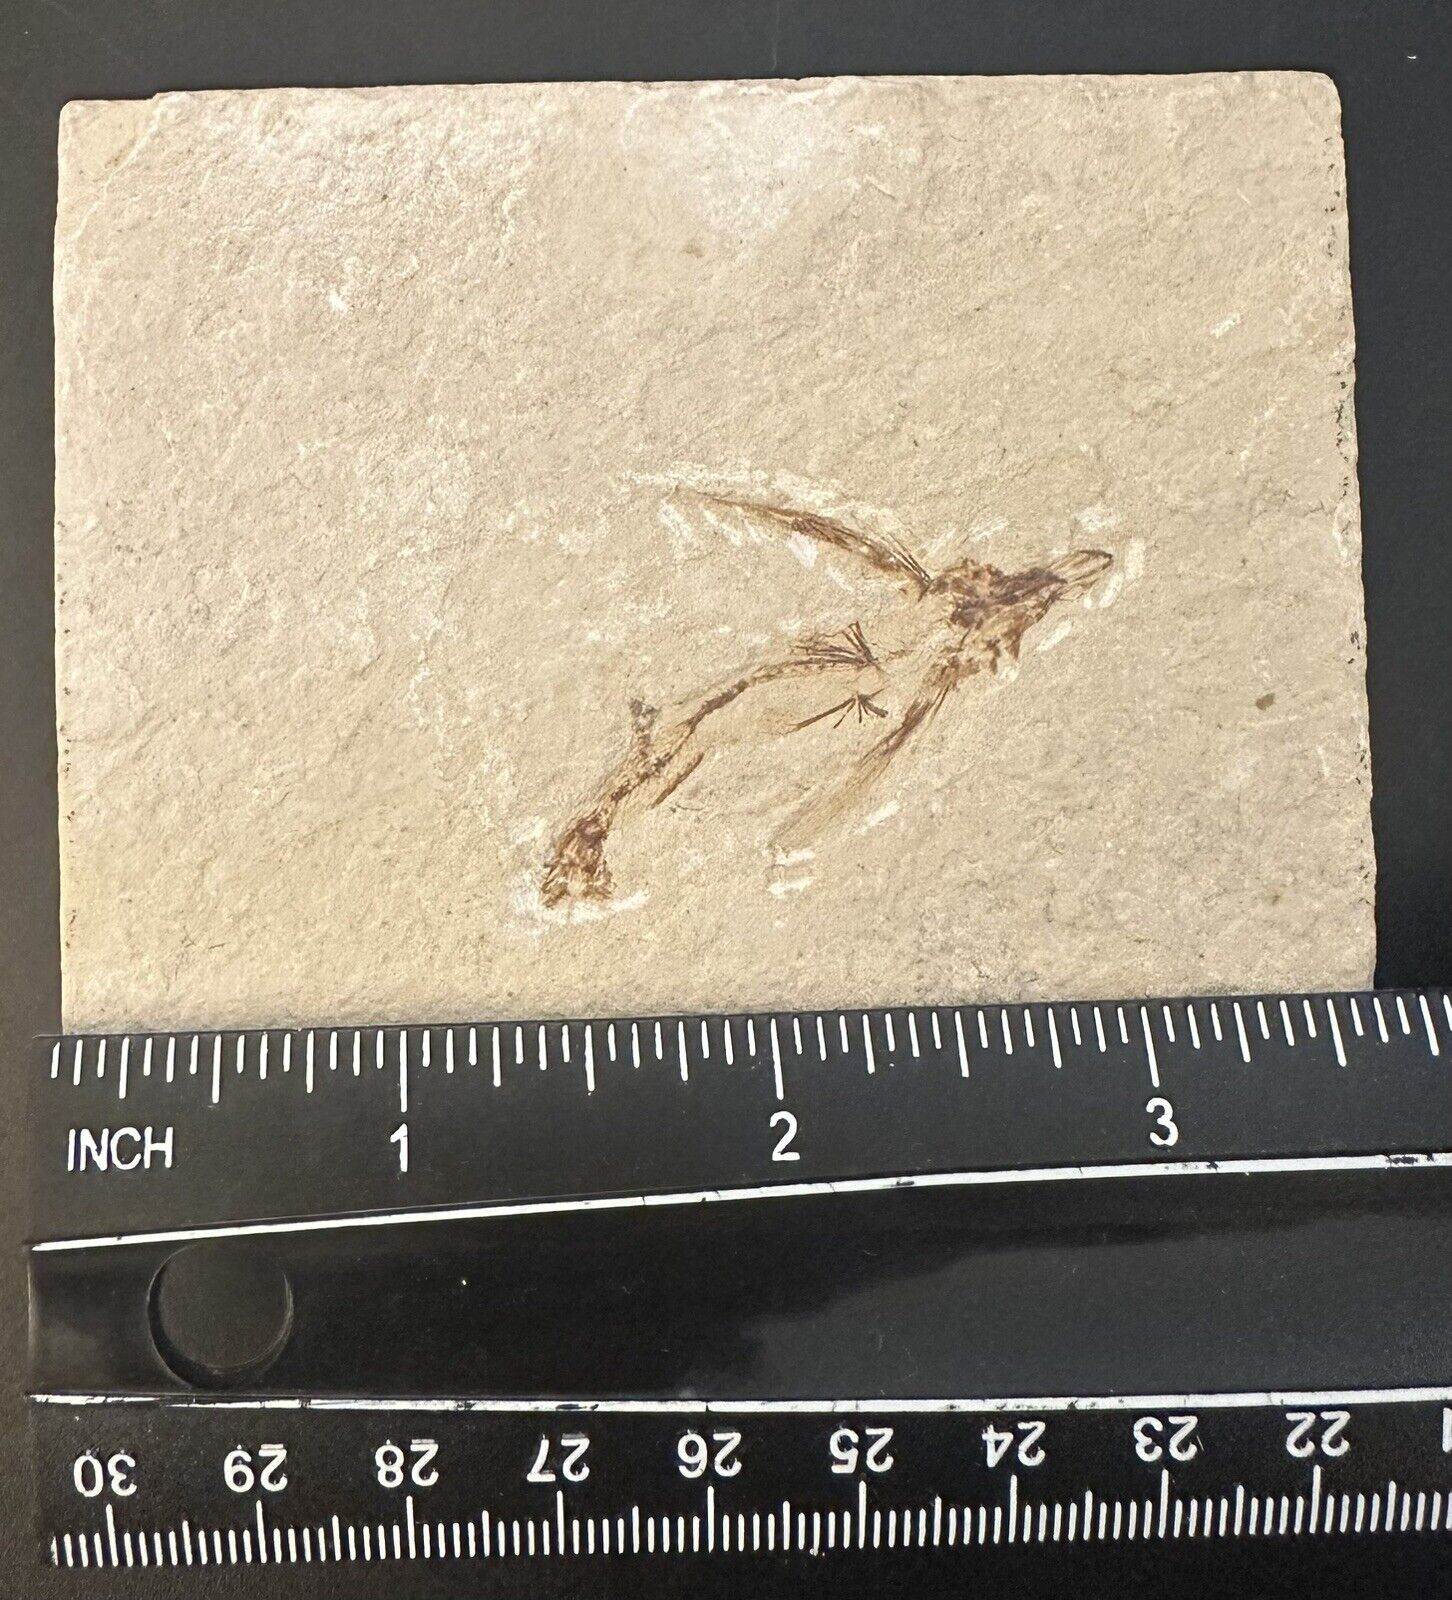 Lebanon Fossil, Exocoetoides-Flying Fish from Haqil, Cretaceous 100 Million Yrs.